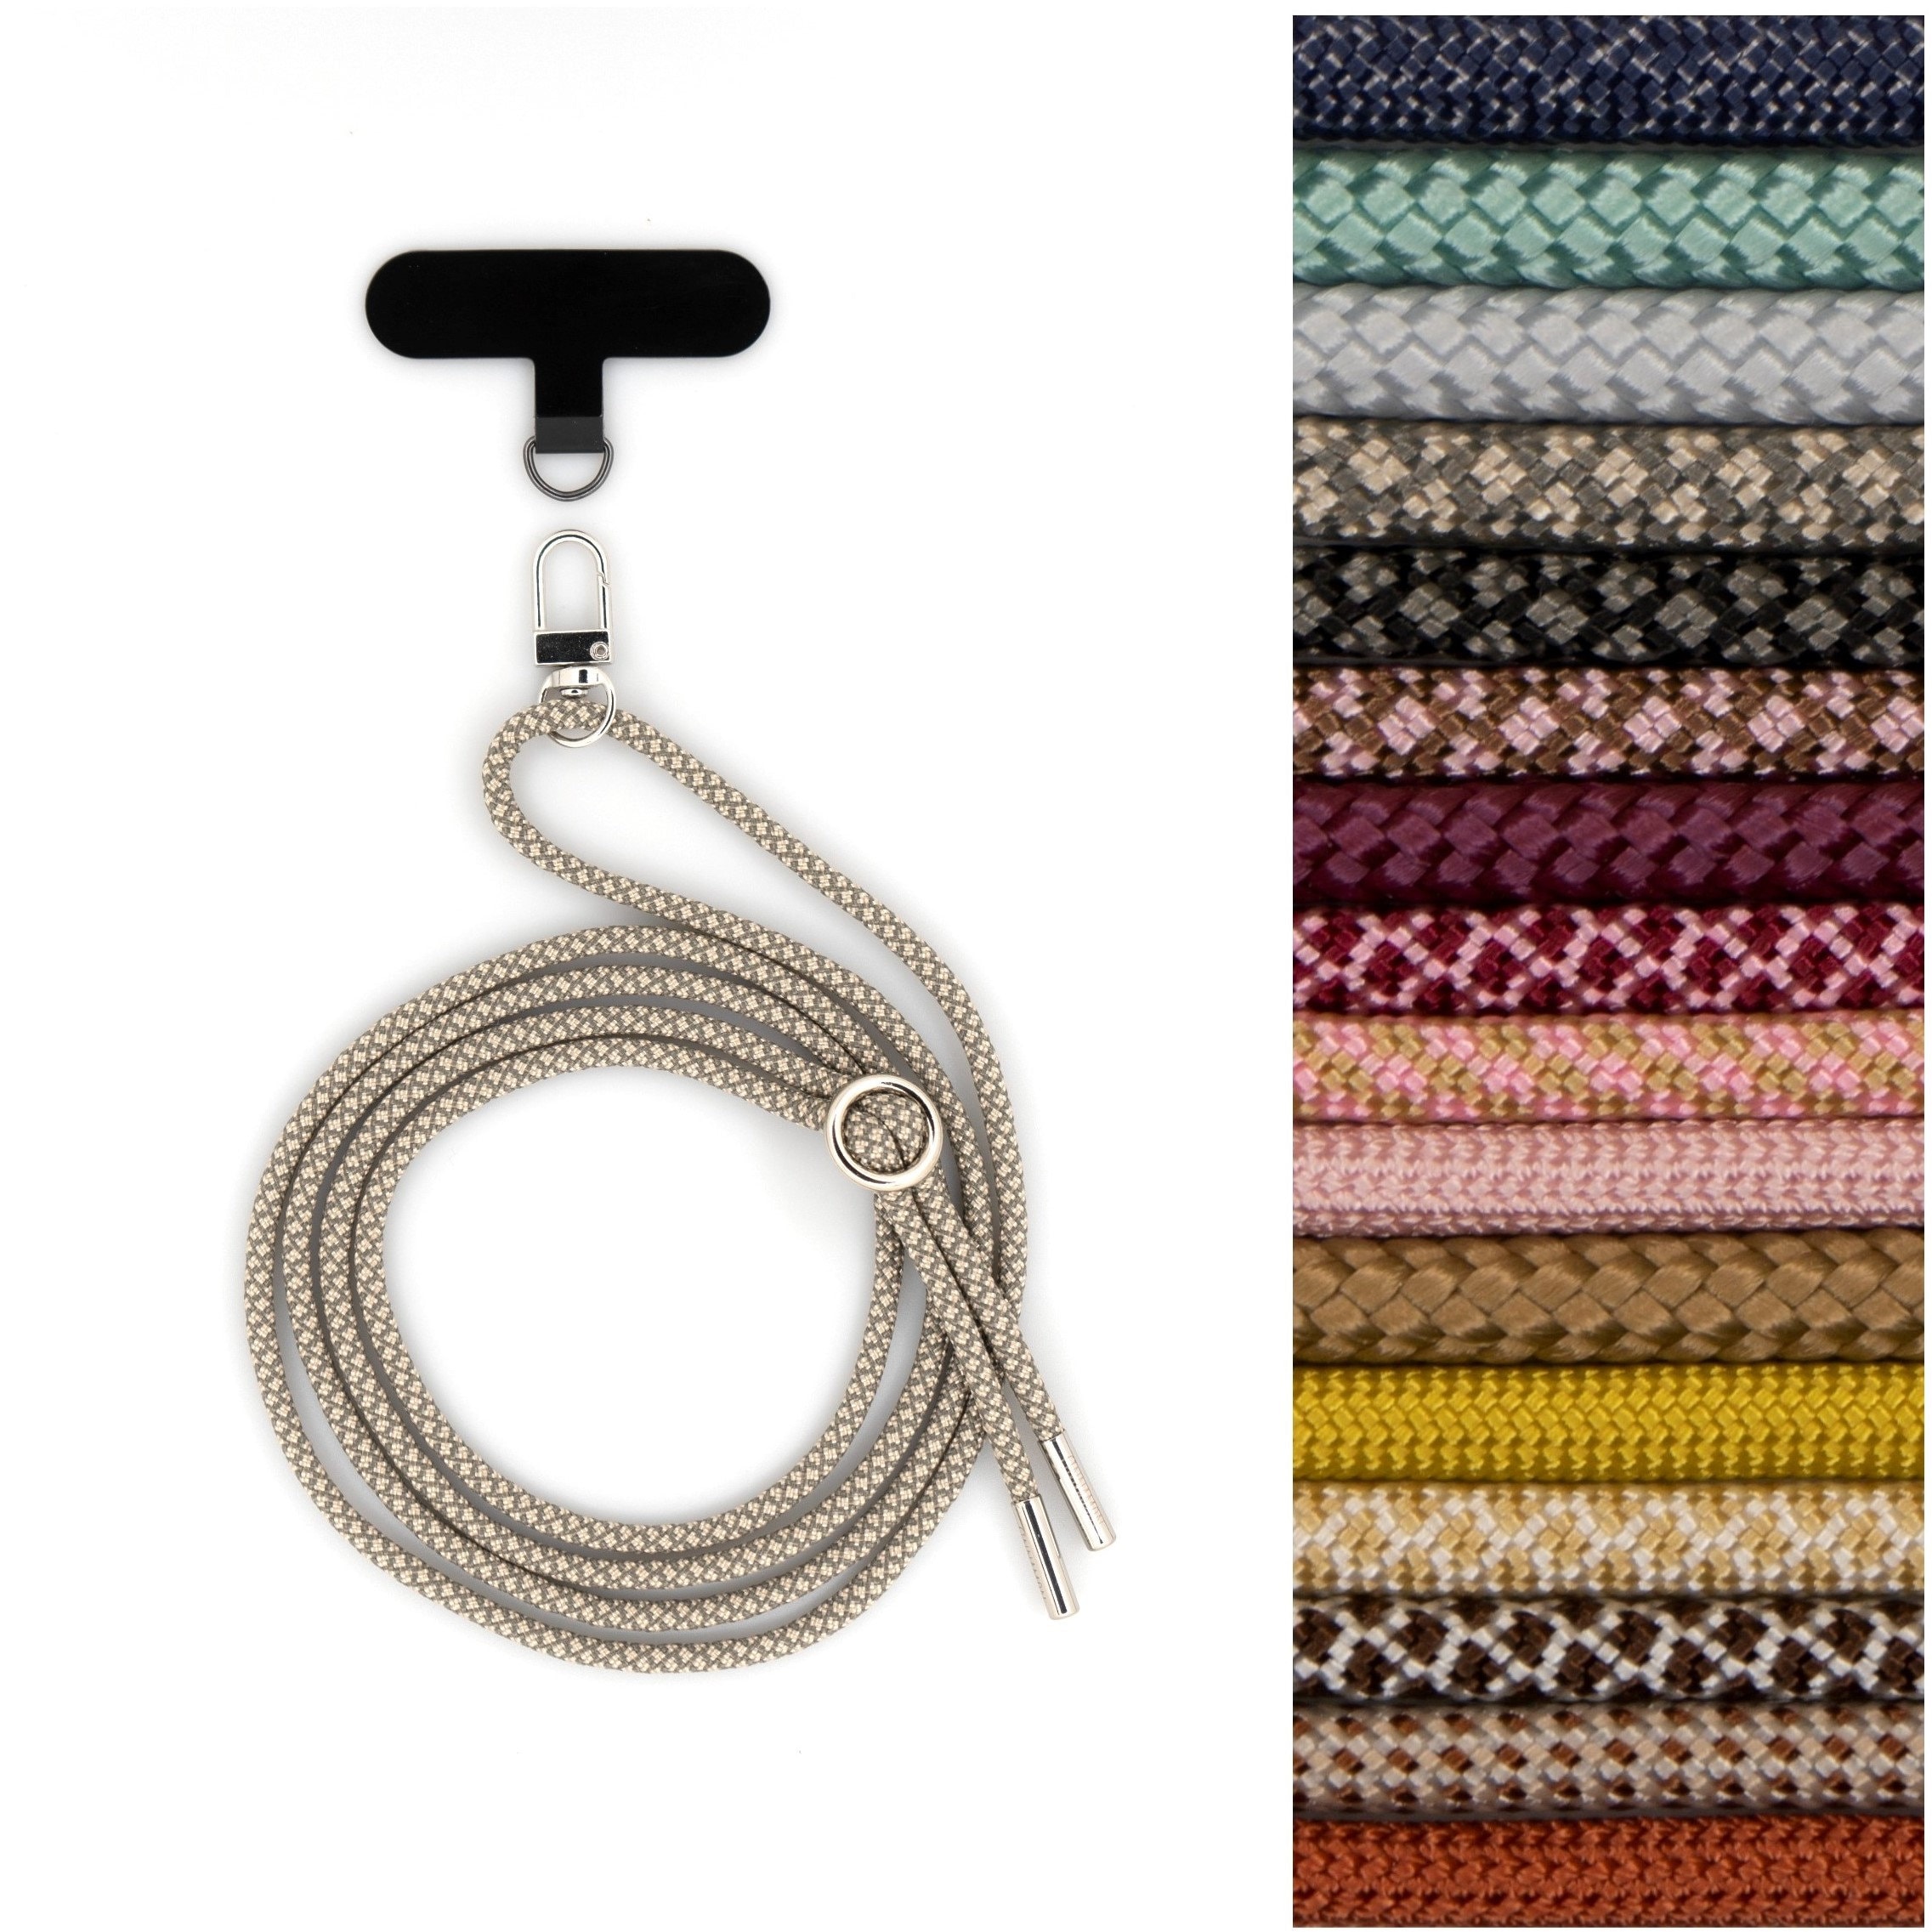 Eilenna Universal Mobile Phone Chain With Carabiner and Patch